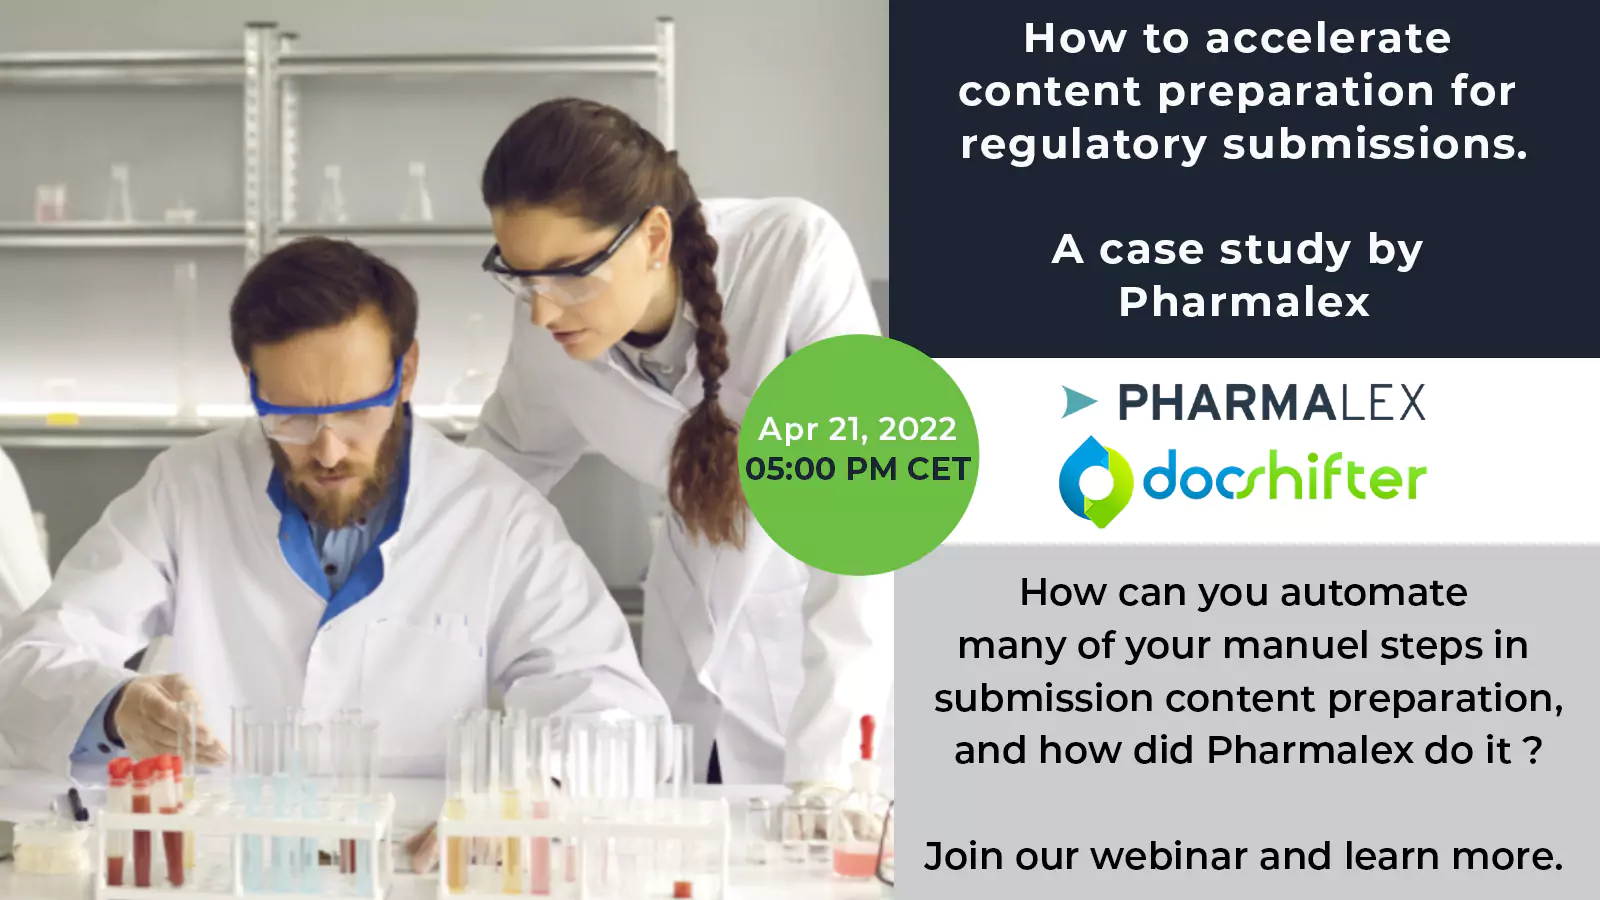 How to accelerate content preparation for regulatory submissions - a case study by PharmaLex